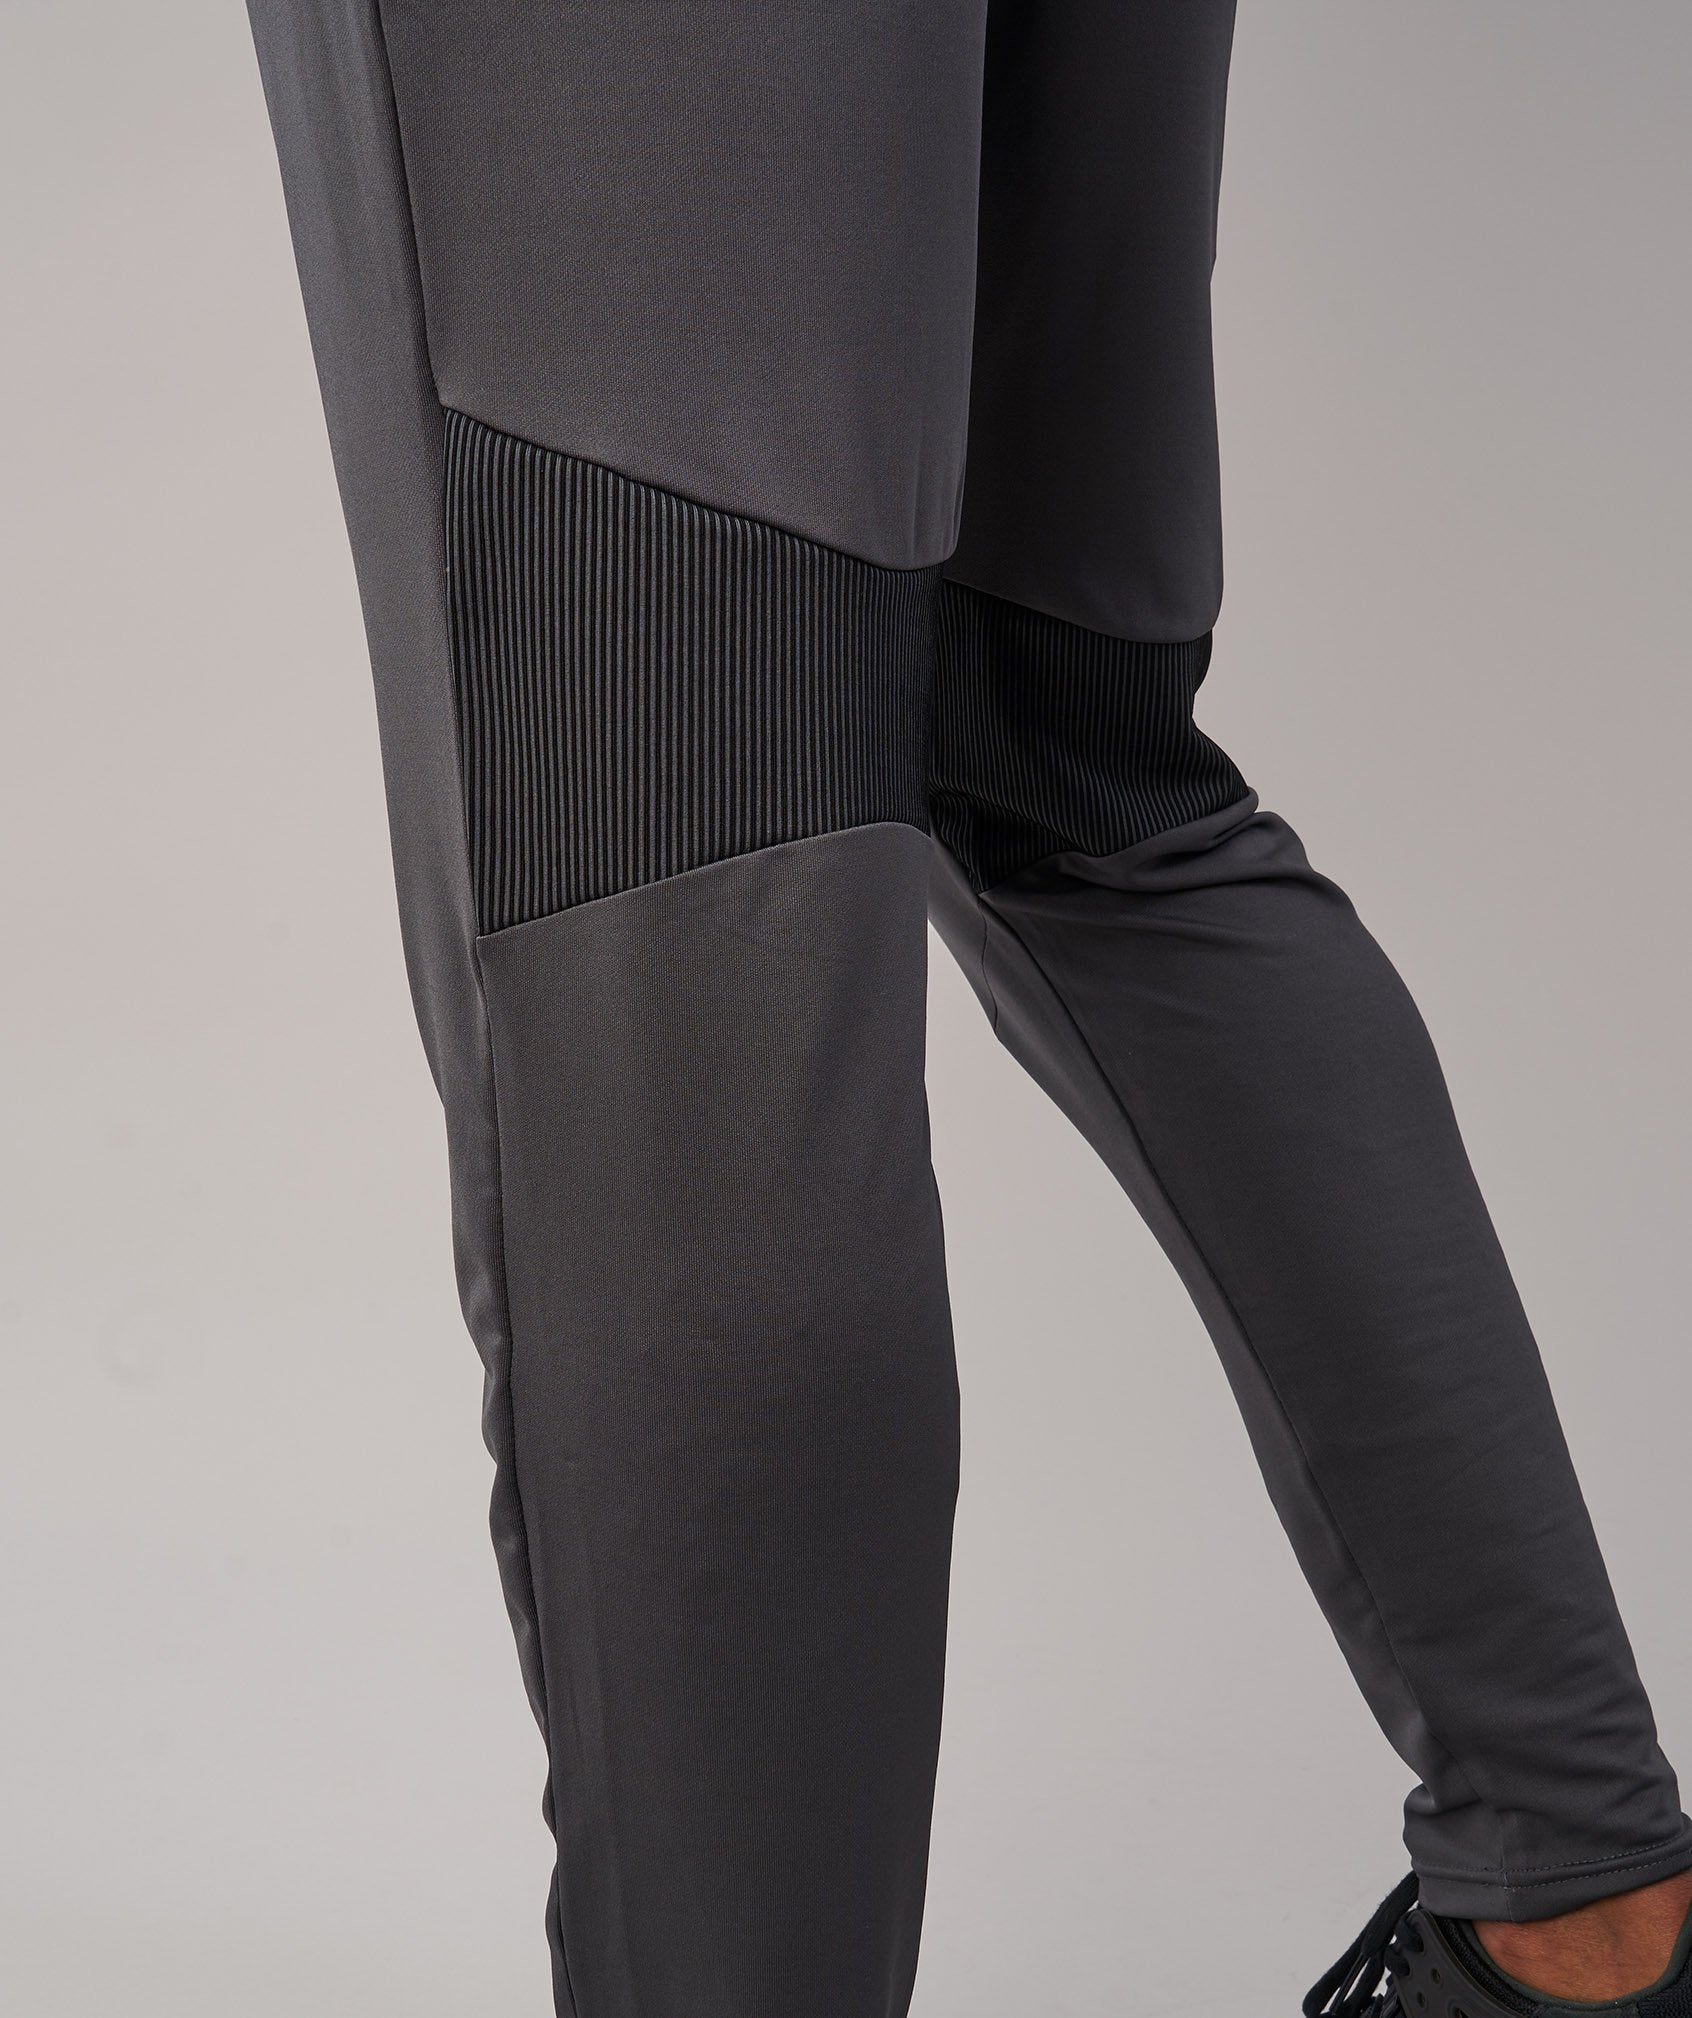 Gravity Bottoms in Charcoal/Black - view 6